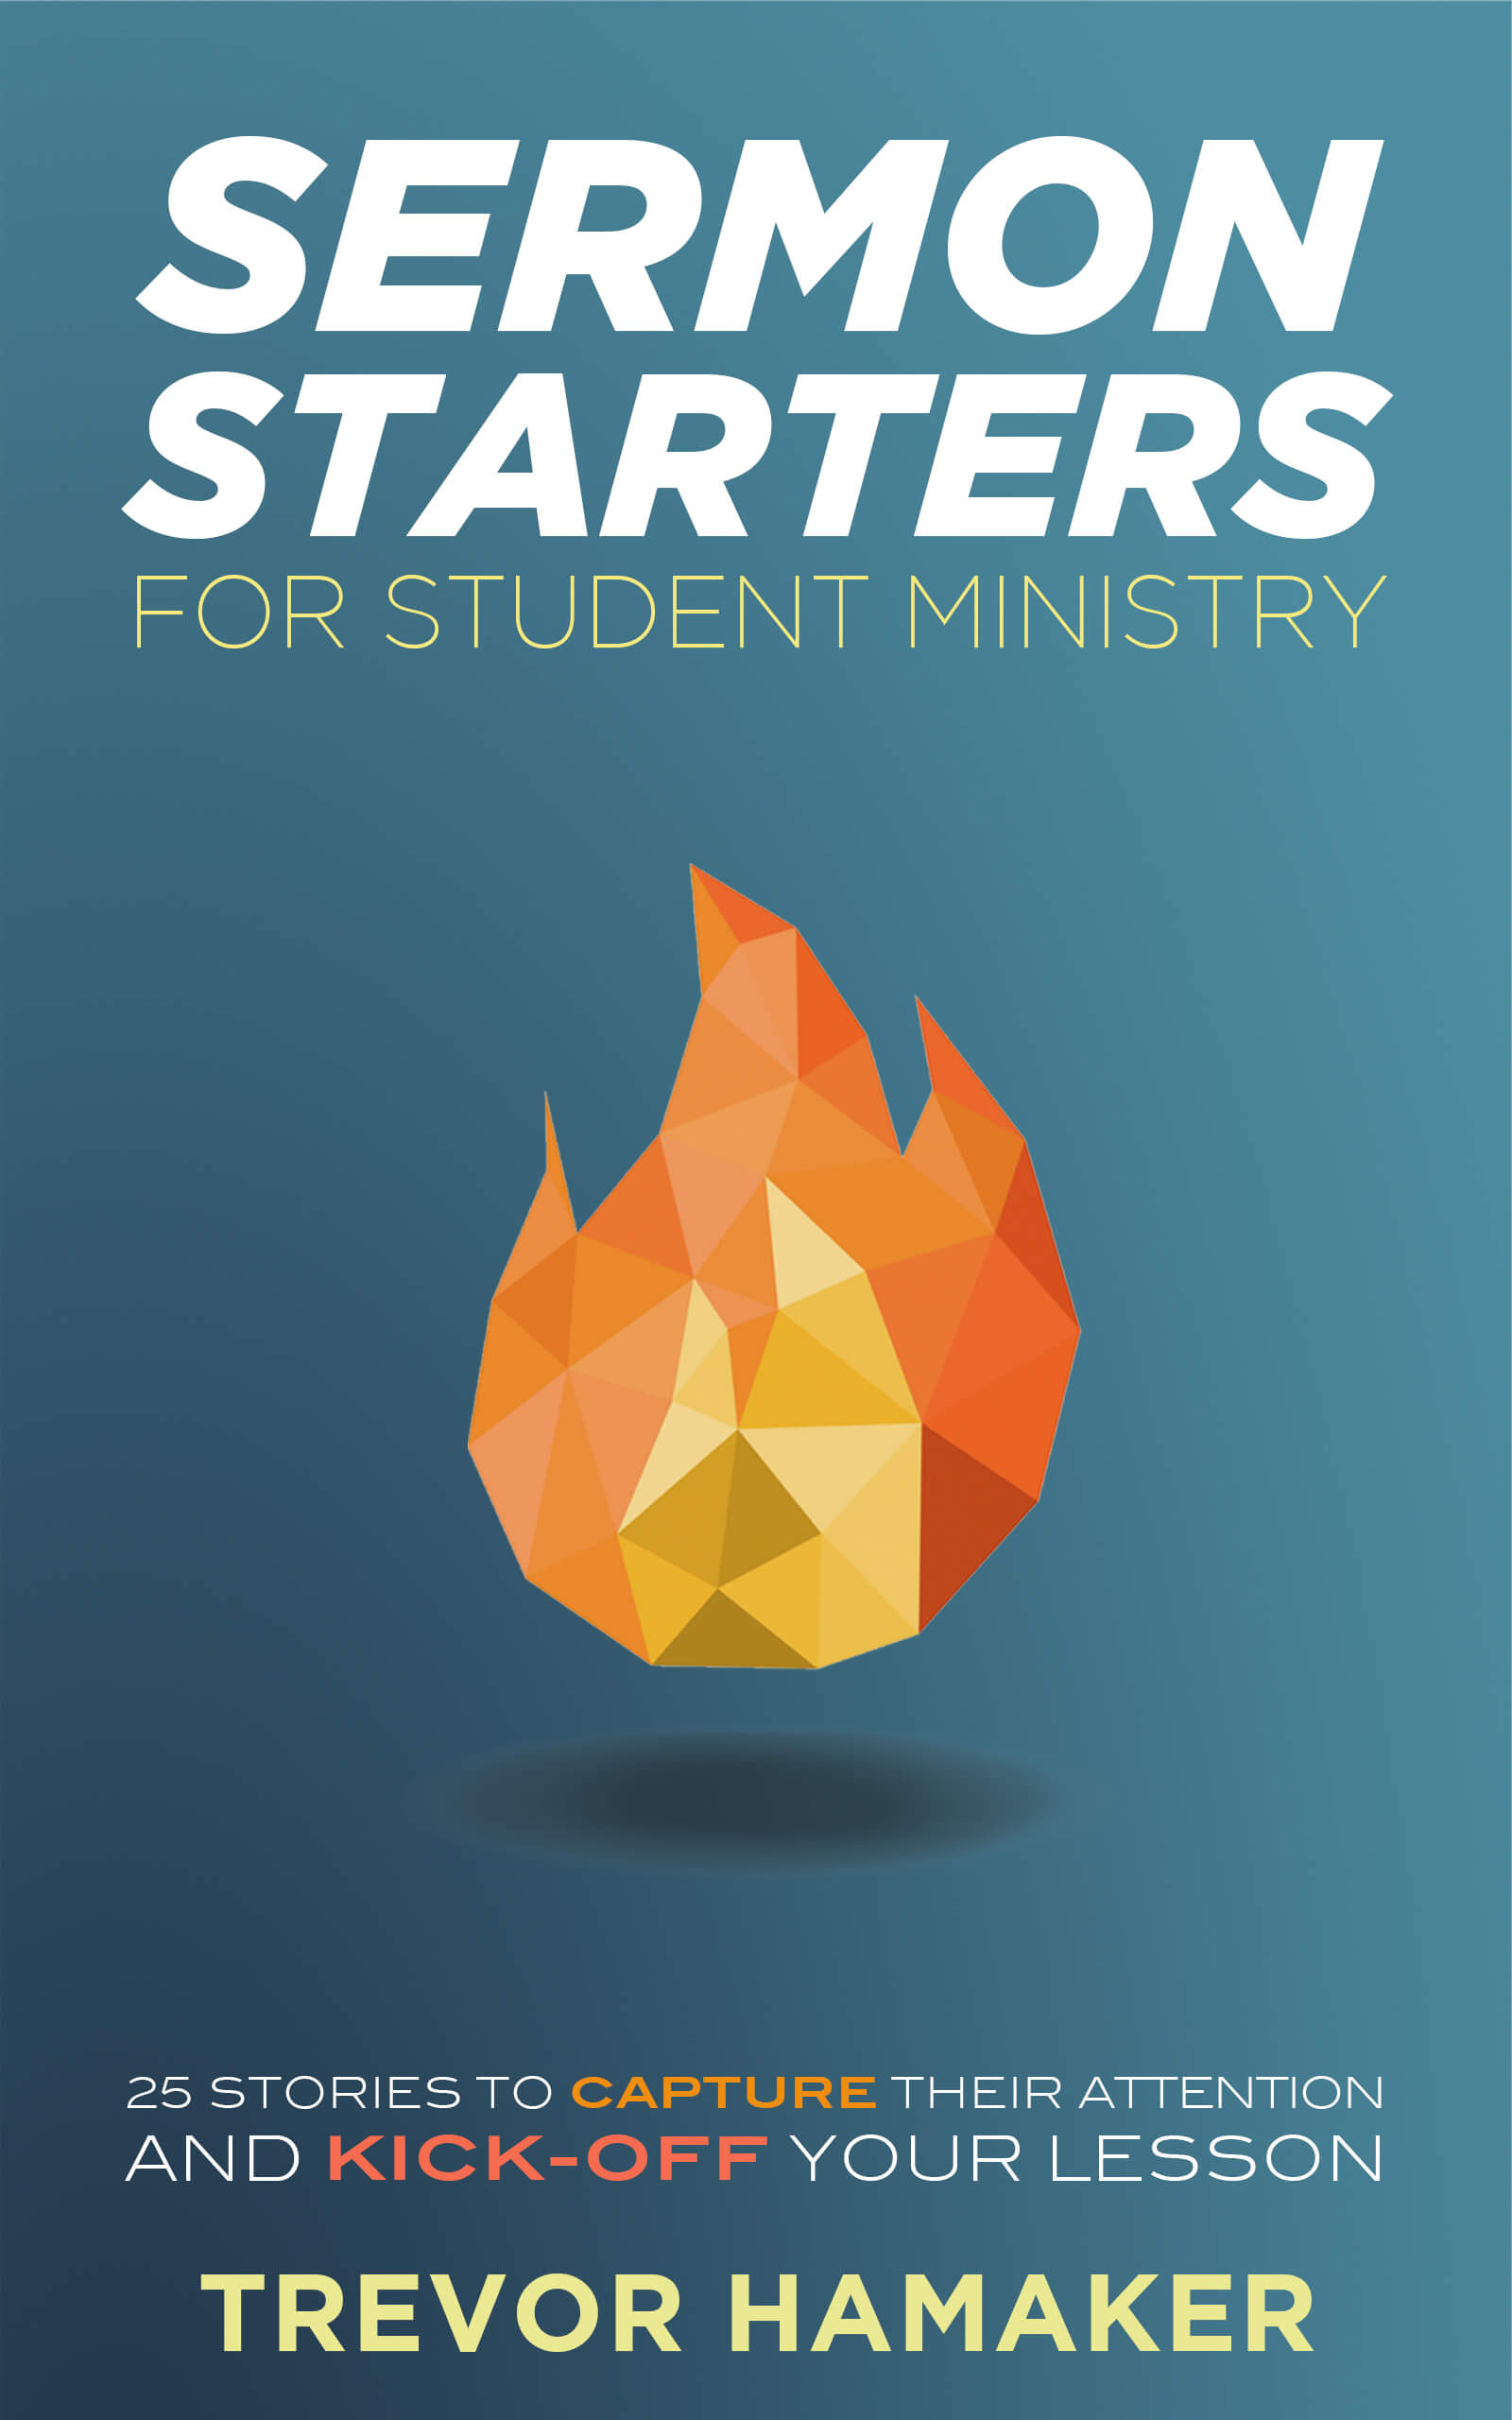 Stories and Illustrations for Student Ministry Sermons